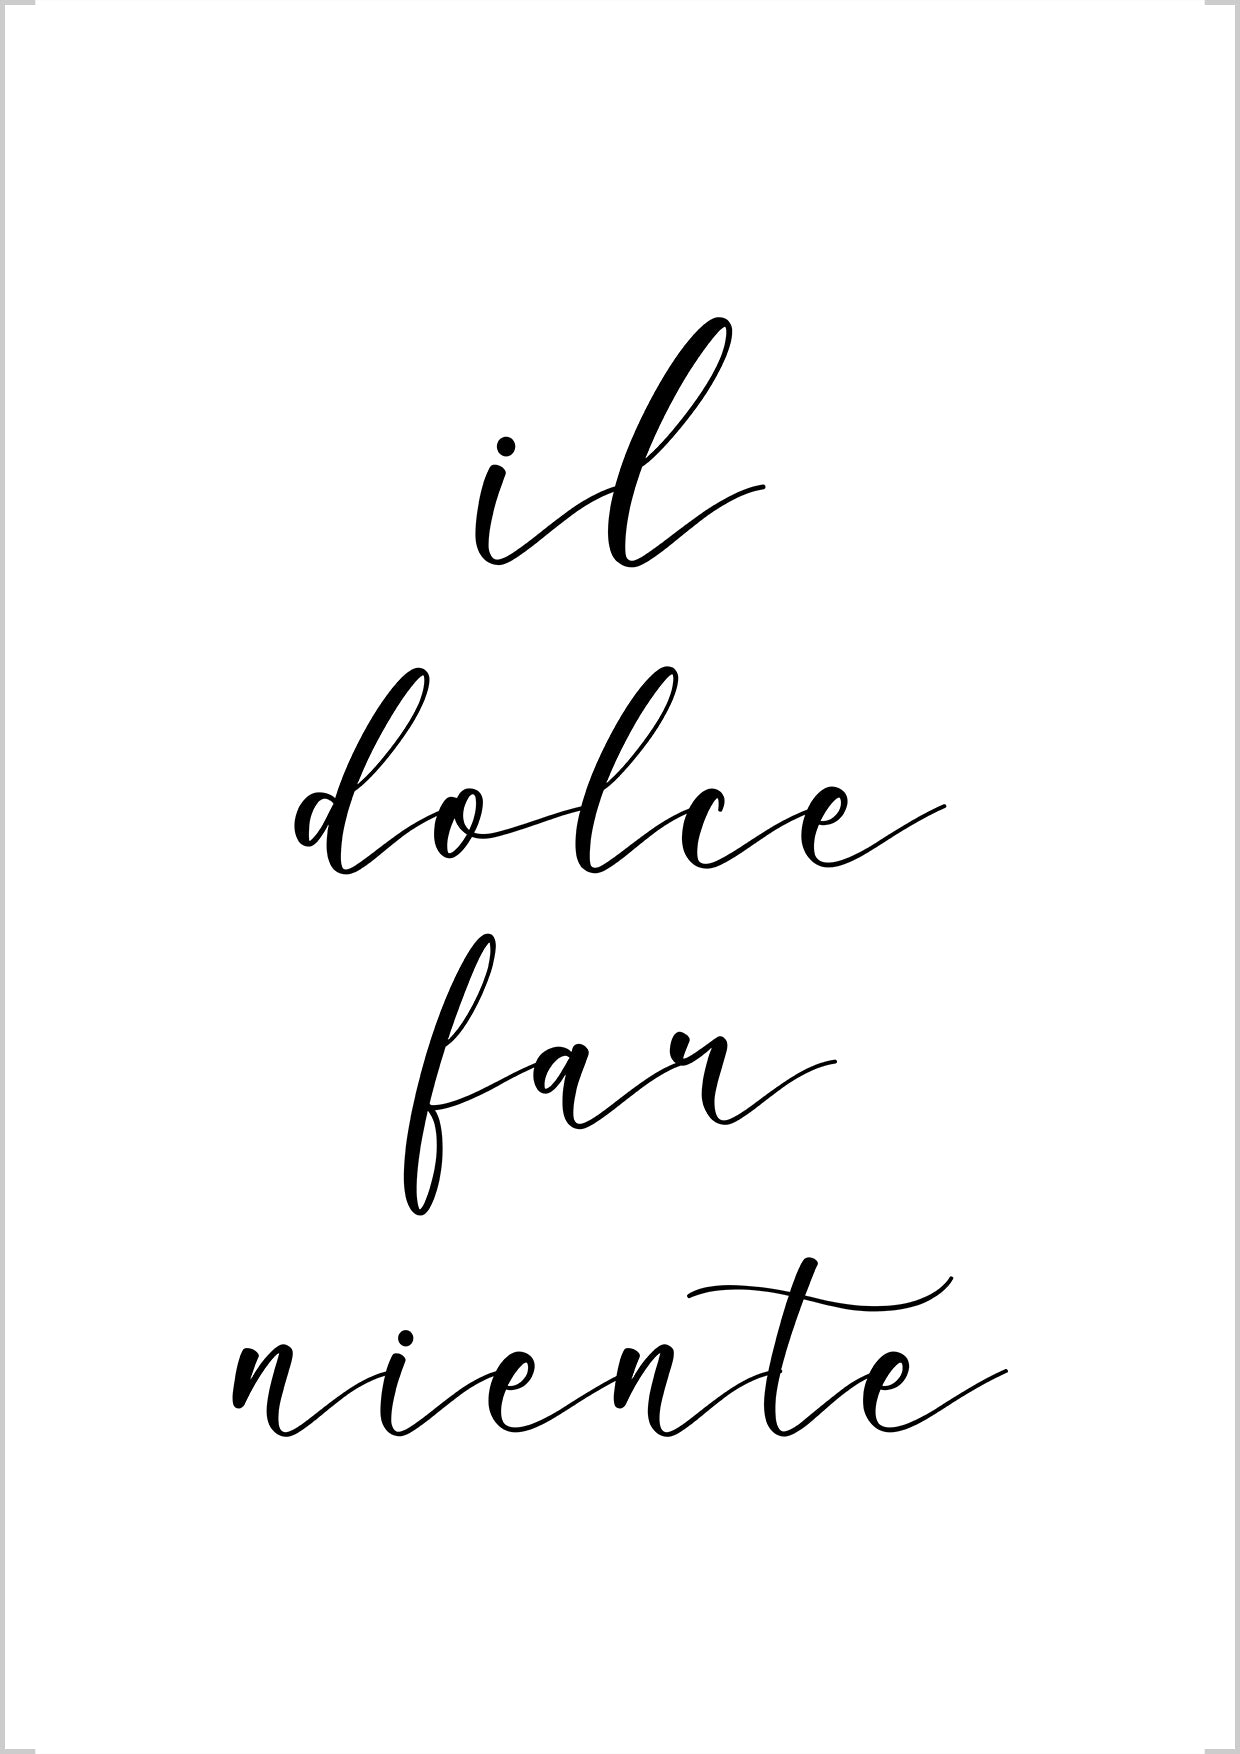 Typography Poster of Italian quote “il dolce far niente”, sweetness of doing nothing